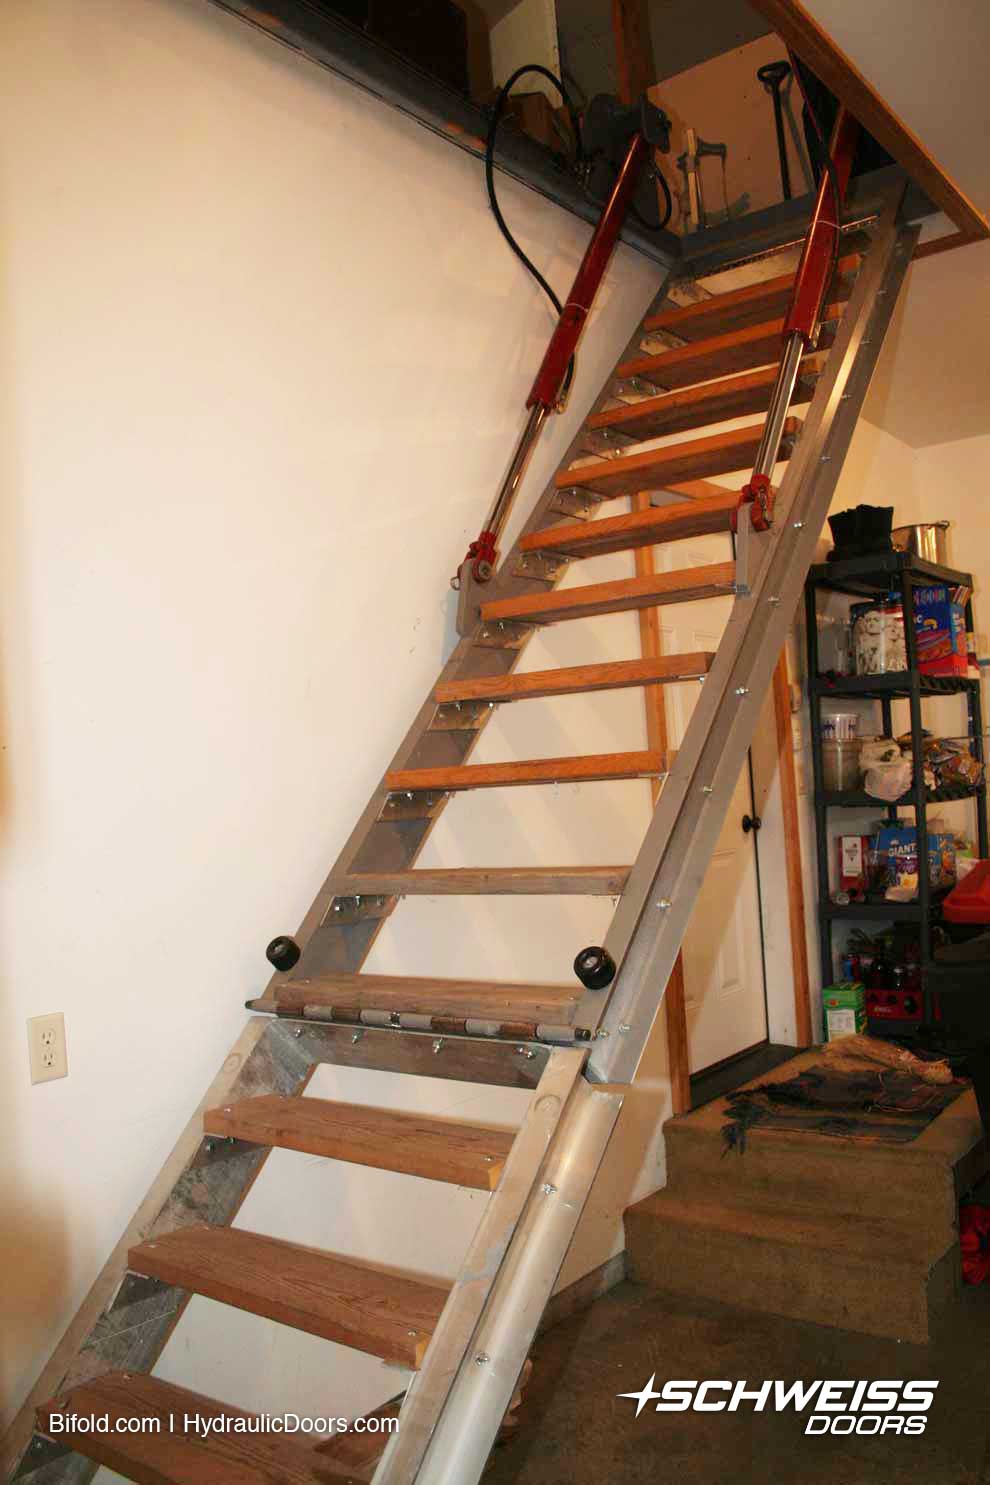 hydraulic staircase is 3' wide by 10.4 inches long